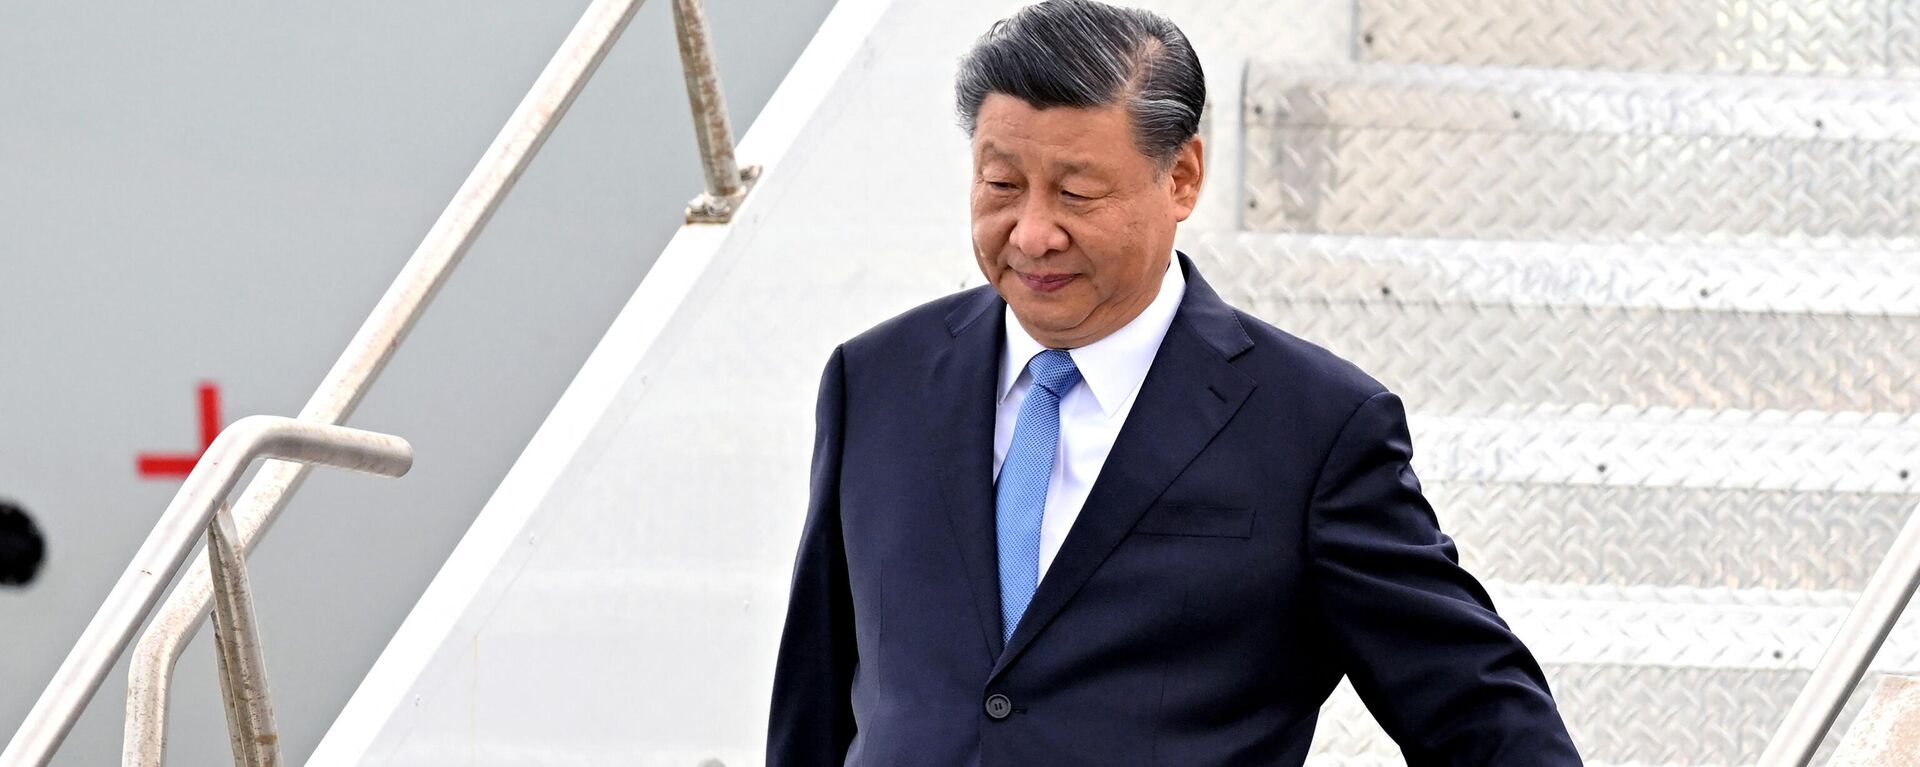 Chinese President Xi Jinping disembarks from a plane as he arrives at San Francisco International airport to attend the Asia-Pacific Economic Cooperation (APEC) leaders' week in San Francisco. - Sputnik International, 1920, 15.11.2023